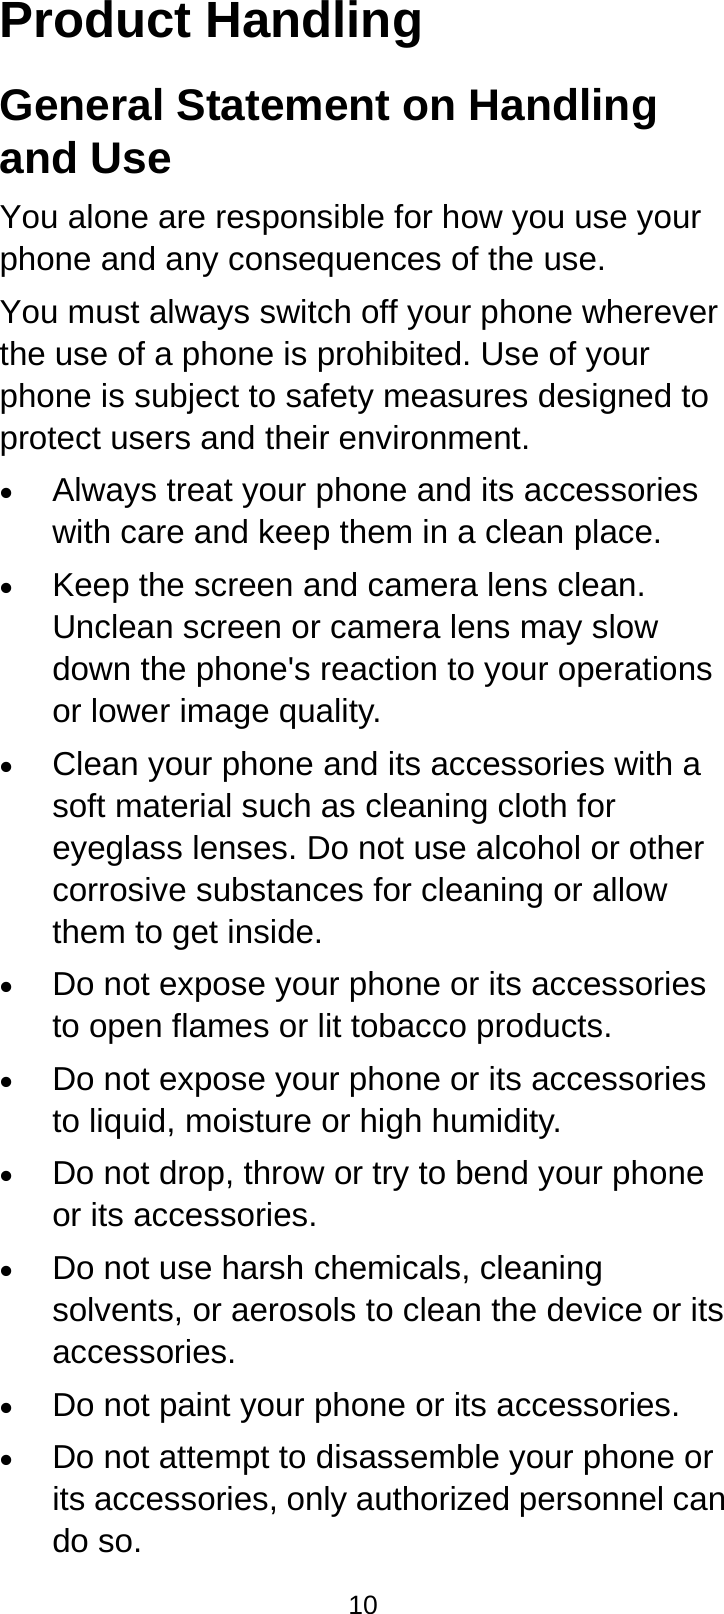  10 Product Handling General Statement on Handling and Use You alone are responsible for how you use your phone and any consequences of the use. You must always switch off your phone wherever the use of a phone is prohibited. Use of your phone is subject to safety measures designed to protect users and their environment. • Always treat your phone and its accessories with care and keep them in a clean place. • Keep the screen and camera lens clean. Unclean screen or camera lens may slow down the phone&apos;s reaction to your operations or lower image quality. • Clean your phone and its accessories with a soft material such as cleaning cloth for eyeglass lenses. Do not use alcohol or other corrosive substances for cleaning or allow them to get inside. • Do not expose your phone or its accessories to open flames or lit tobacco products. • Do not expose your phone or its accessories to liquid, moisture or high humidity. • Do not drop, throw or try to bend your phone or its accessories. • Do not use harsh chemicals, cleaning solvents, or aerosols to clean the device or its accessories. • Do not paint your phone or its accessories. • Do not attempt to disassemble your phone or its accessories, only authorized personnel can do so. 